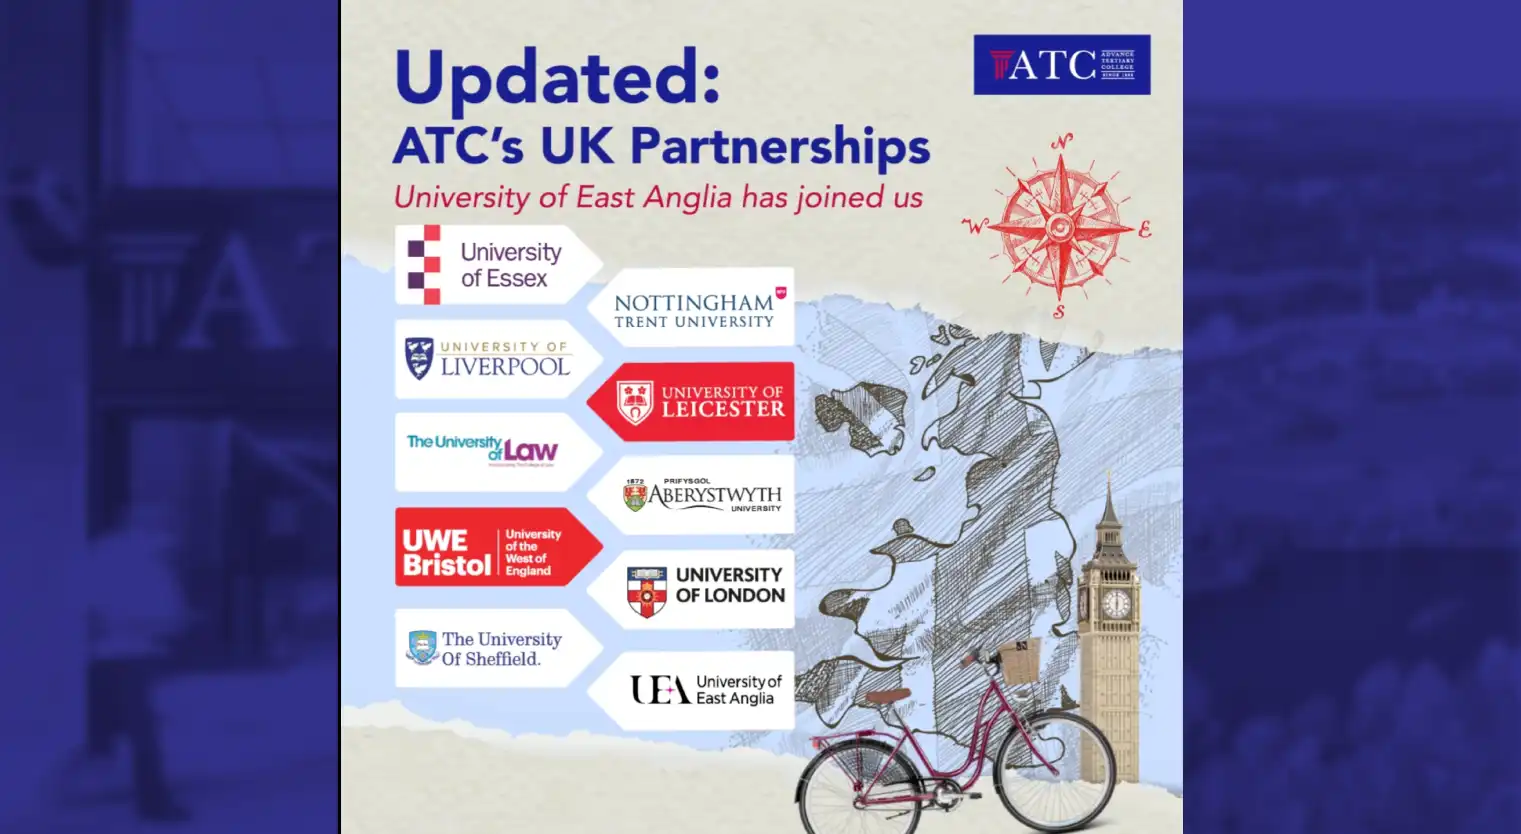 atc-expands-uk-partner-institutions-with-university-east-anglia